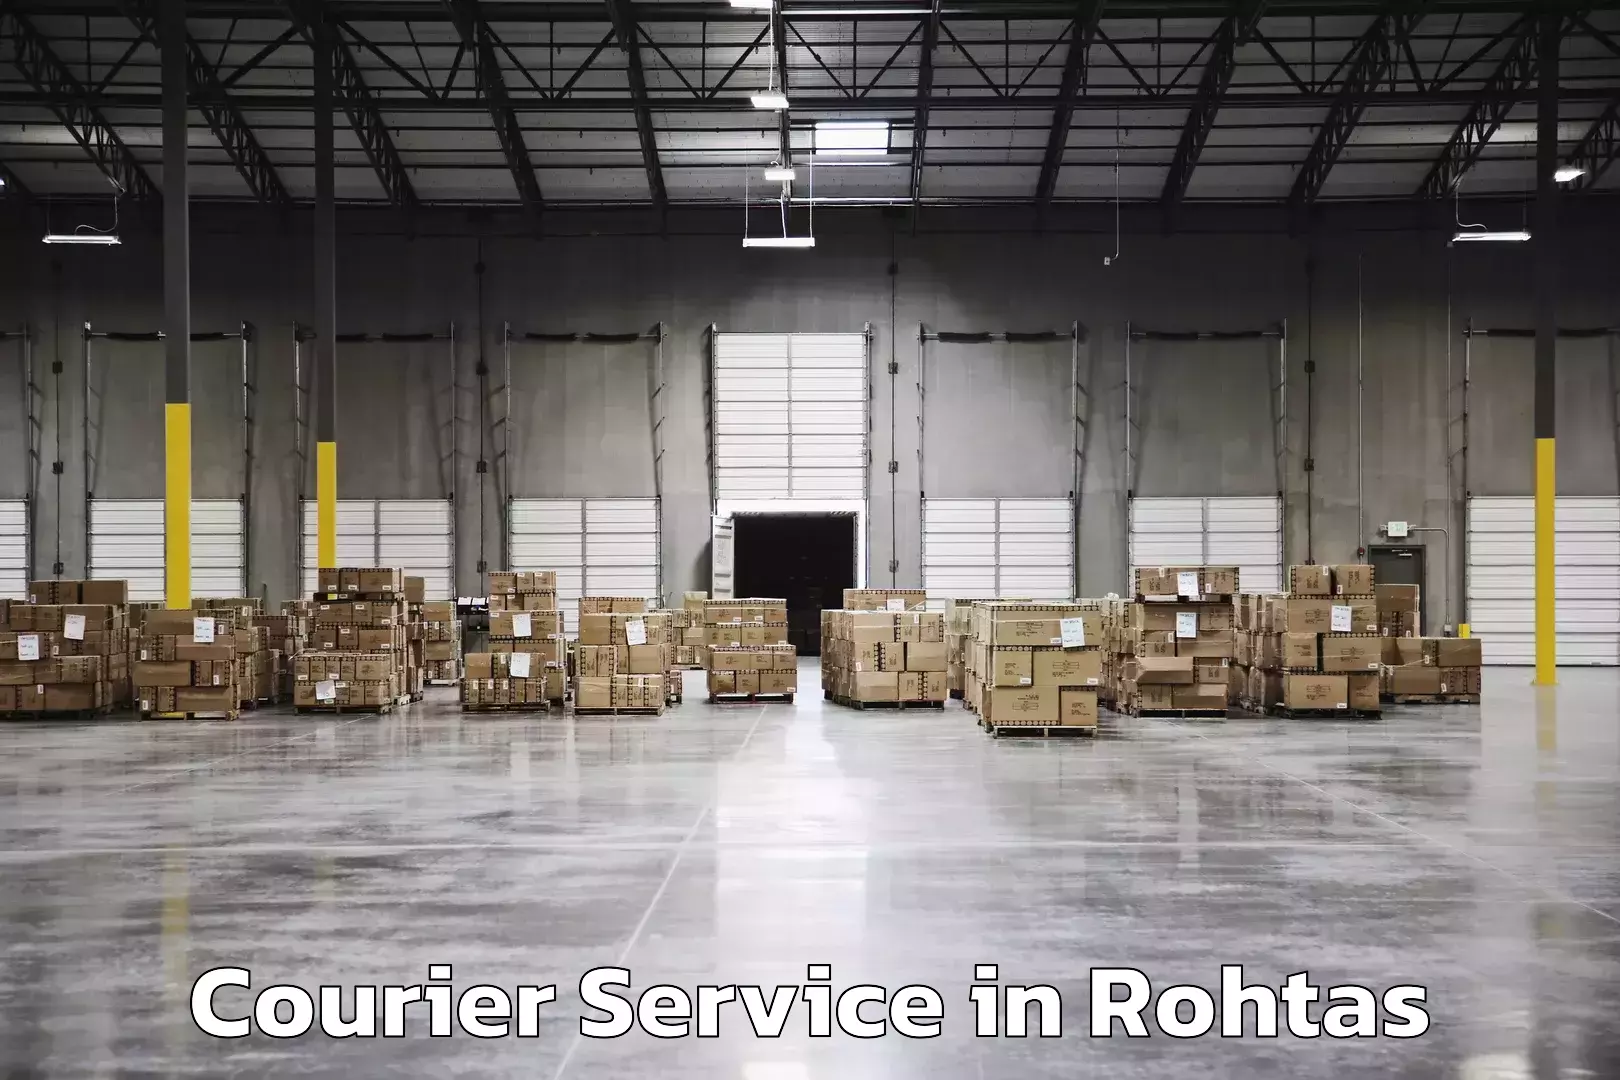 Fast delivery service in Rohtas